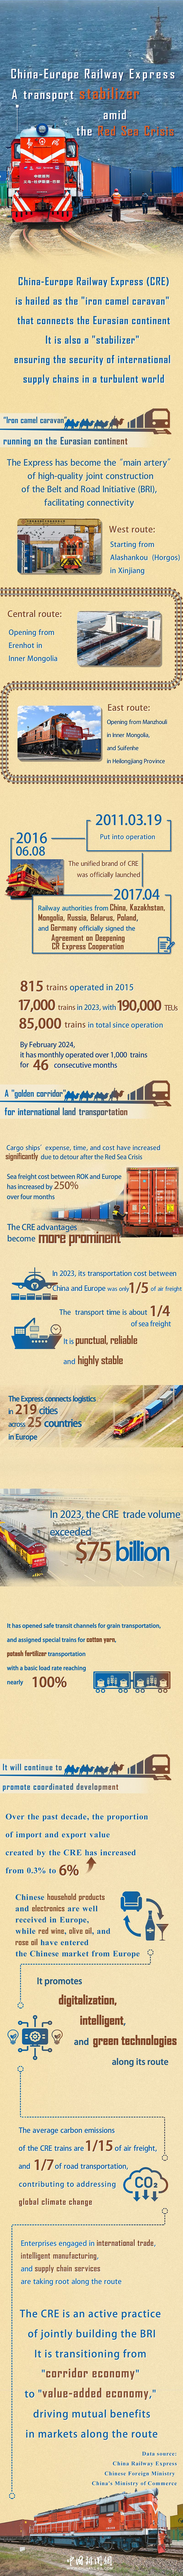 Infographic: China-Europe Railway Express, a transport stabilizer amid Red Sea Crisis